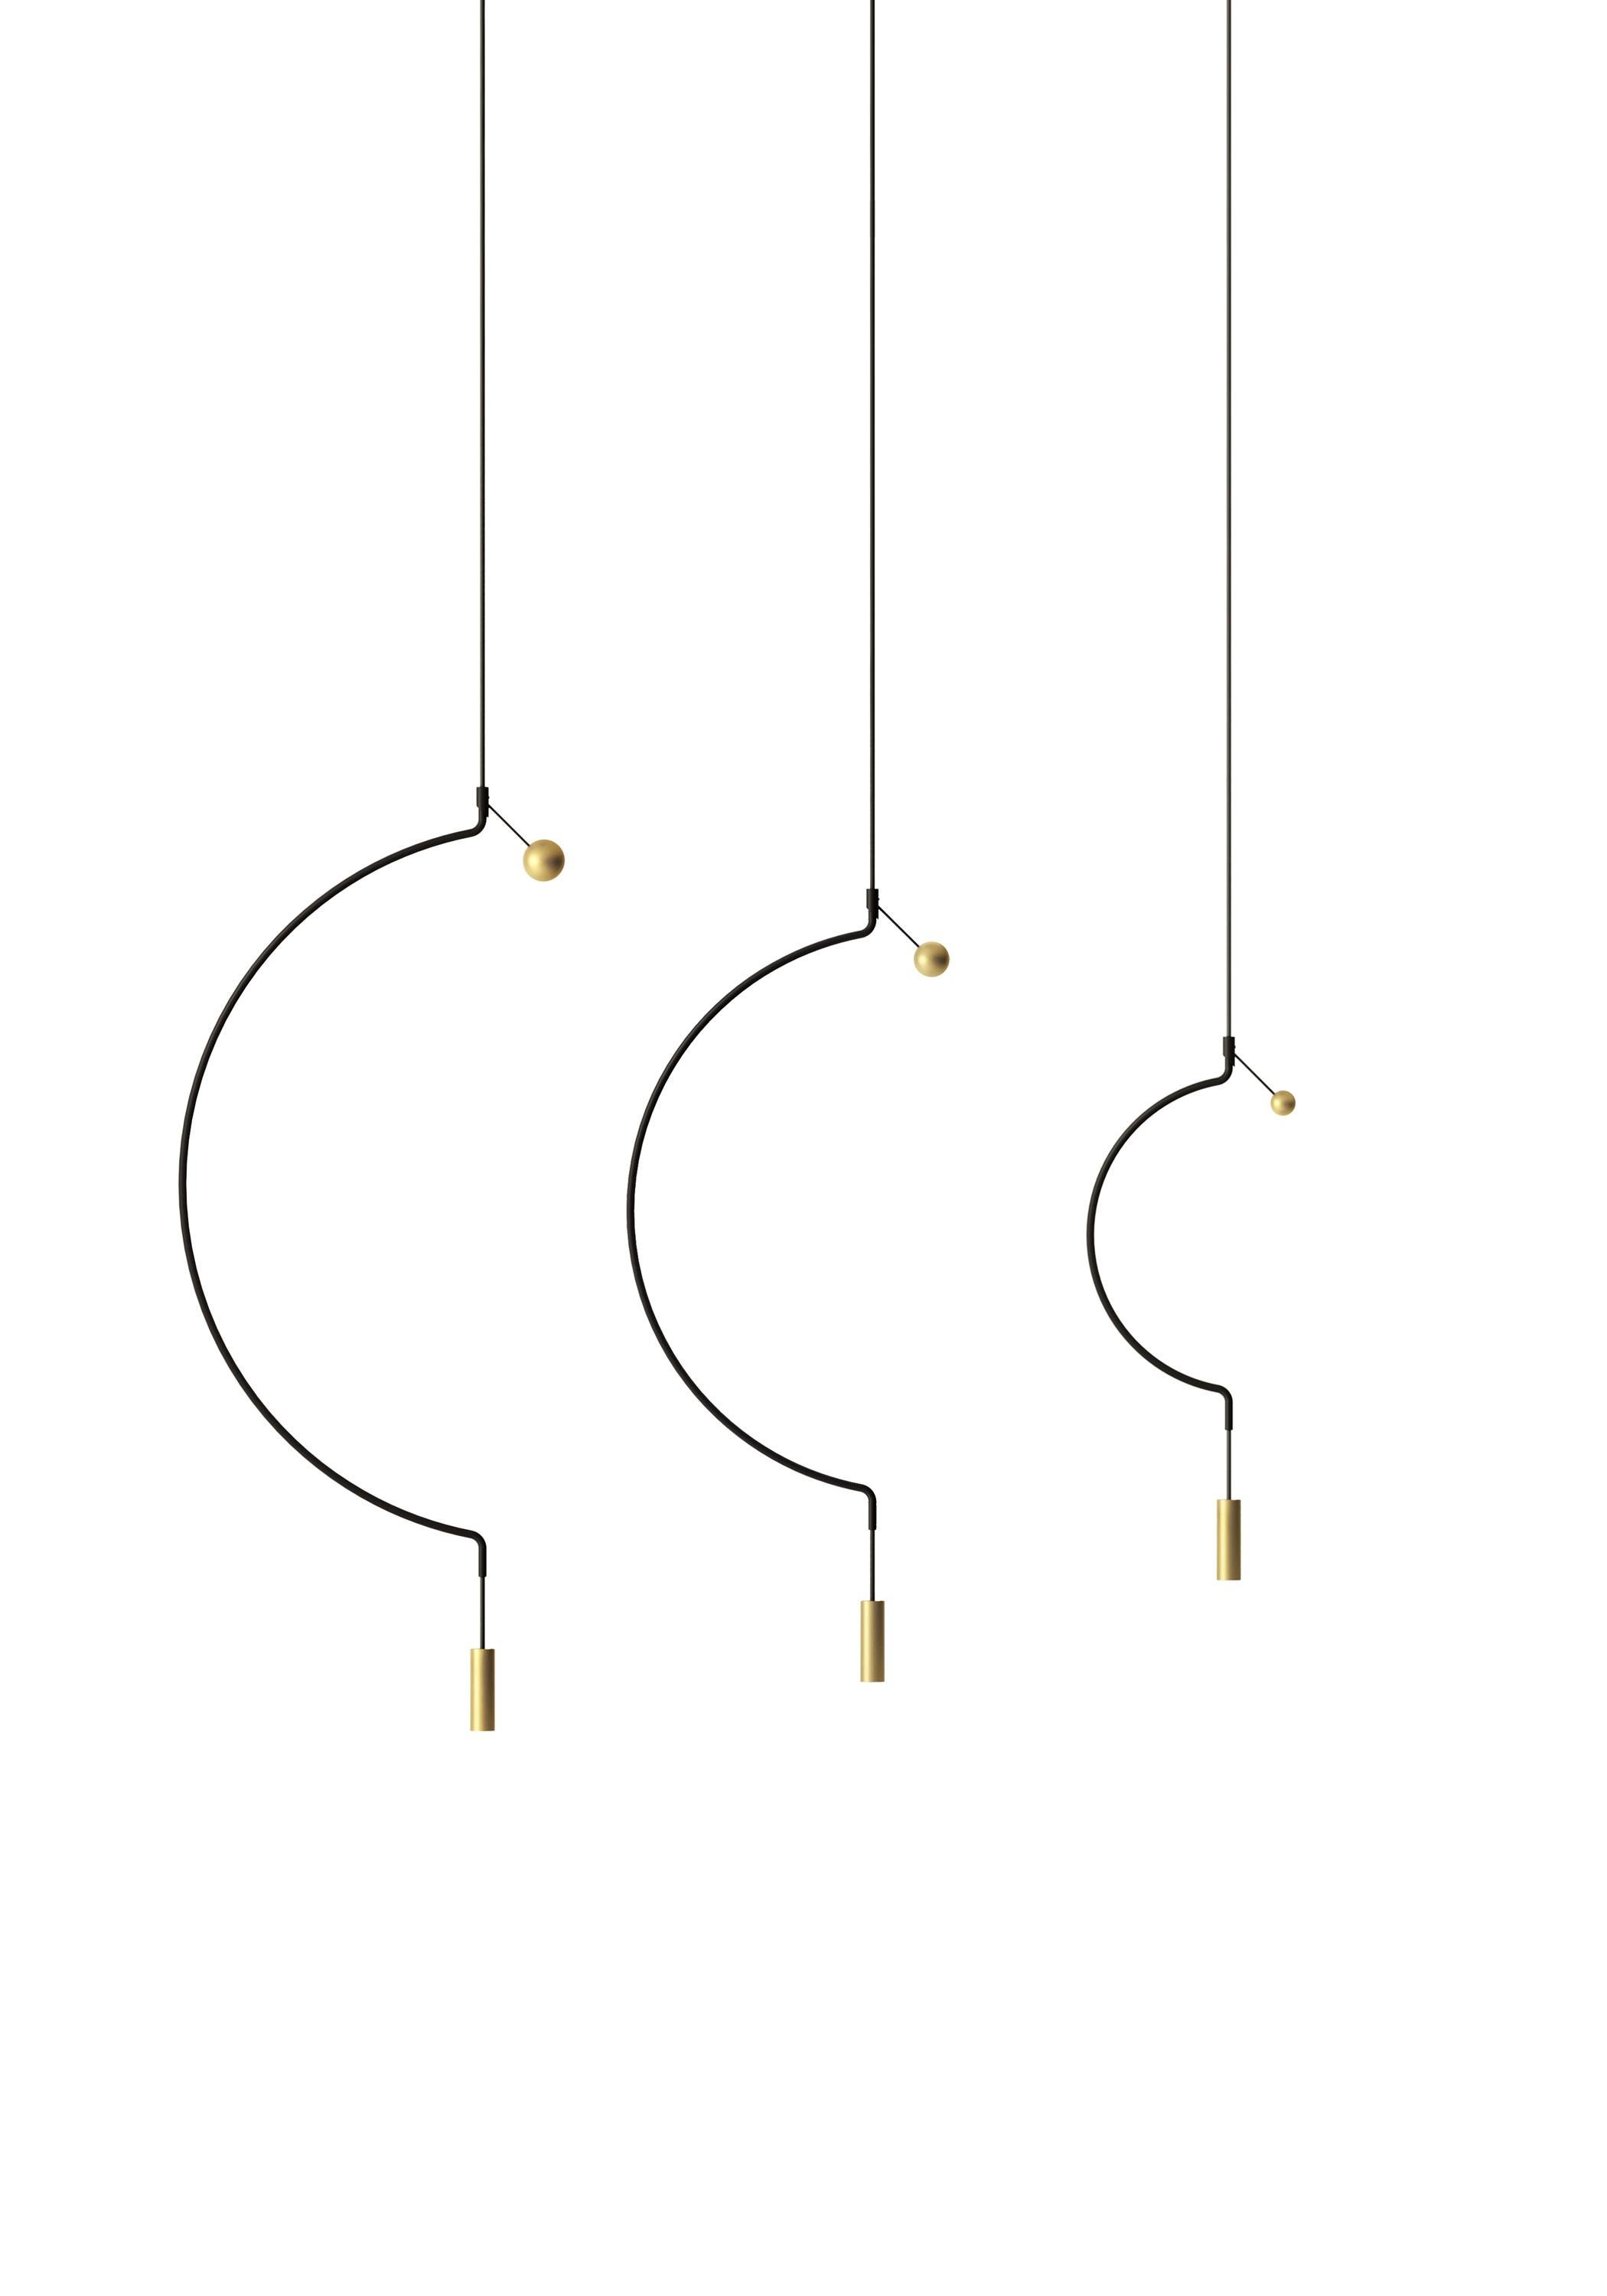 Axolight Liaison Model G1 Pendant Lamp in Black/Gold by Sara Moroni

Modular lightness and elegance. Liaison tells about the perfect balance of three geometric archetypes: sphere, circle and cylinder compose a system that includes the single pendant